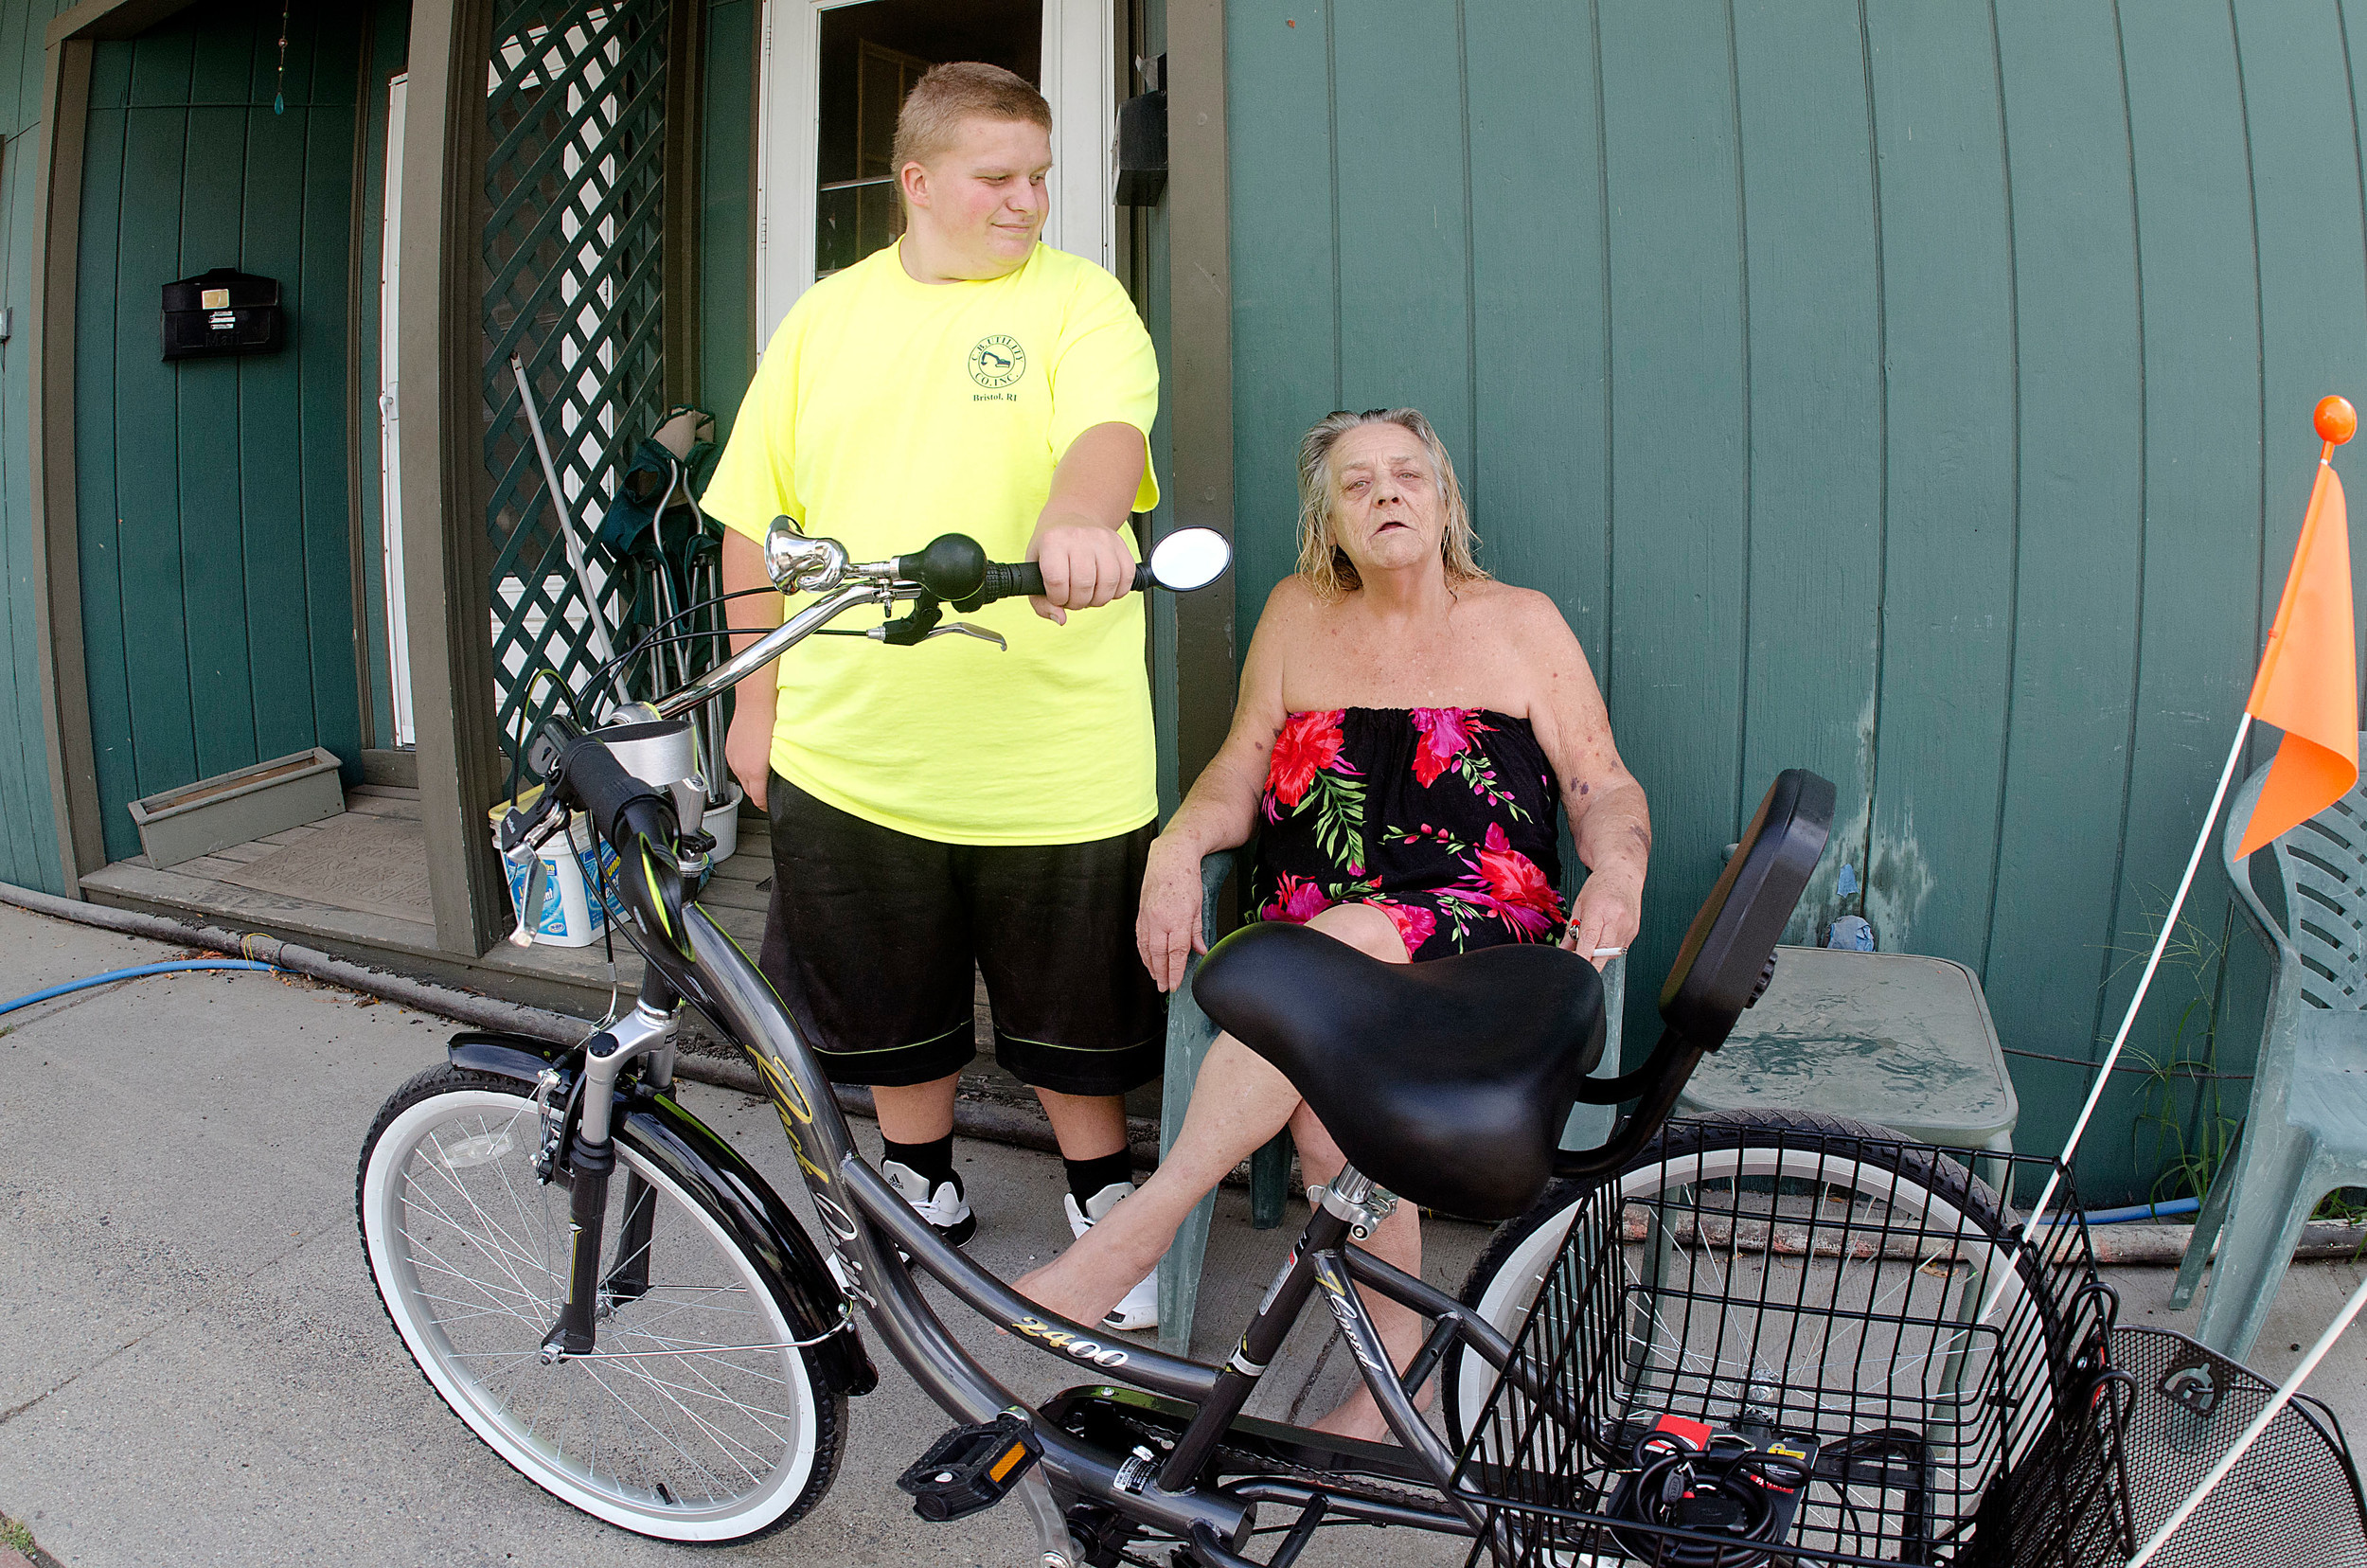 Hunter shows the new bike to his grandmother Kitty.